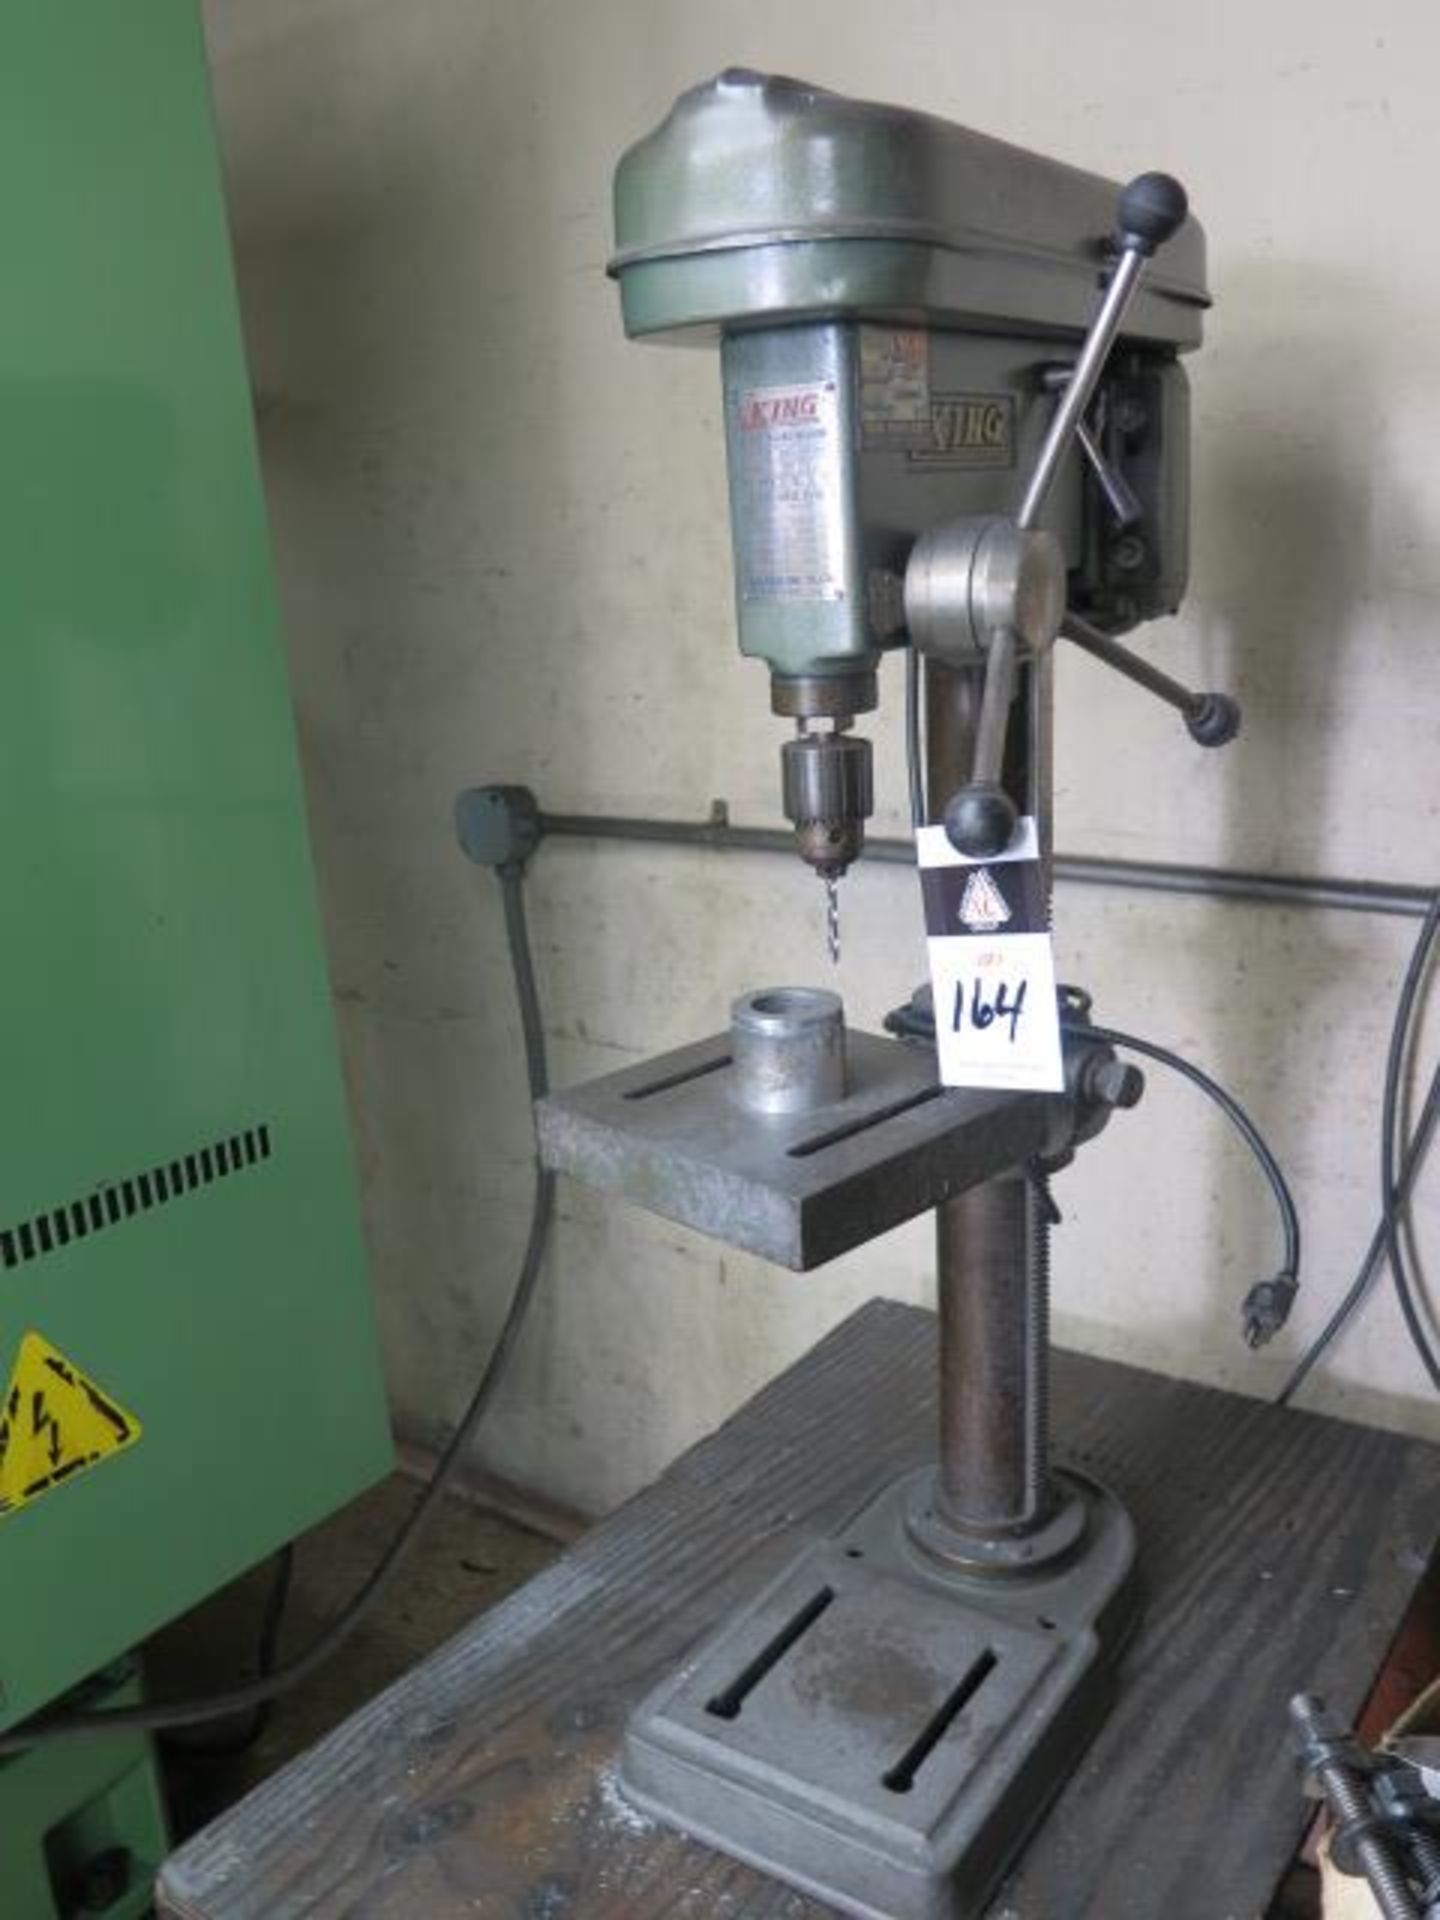 King Bench Model Drill Press w/ Bench (SOLD AS-IS - NO WARRANTY) - Image 2 of 6